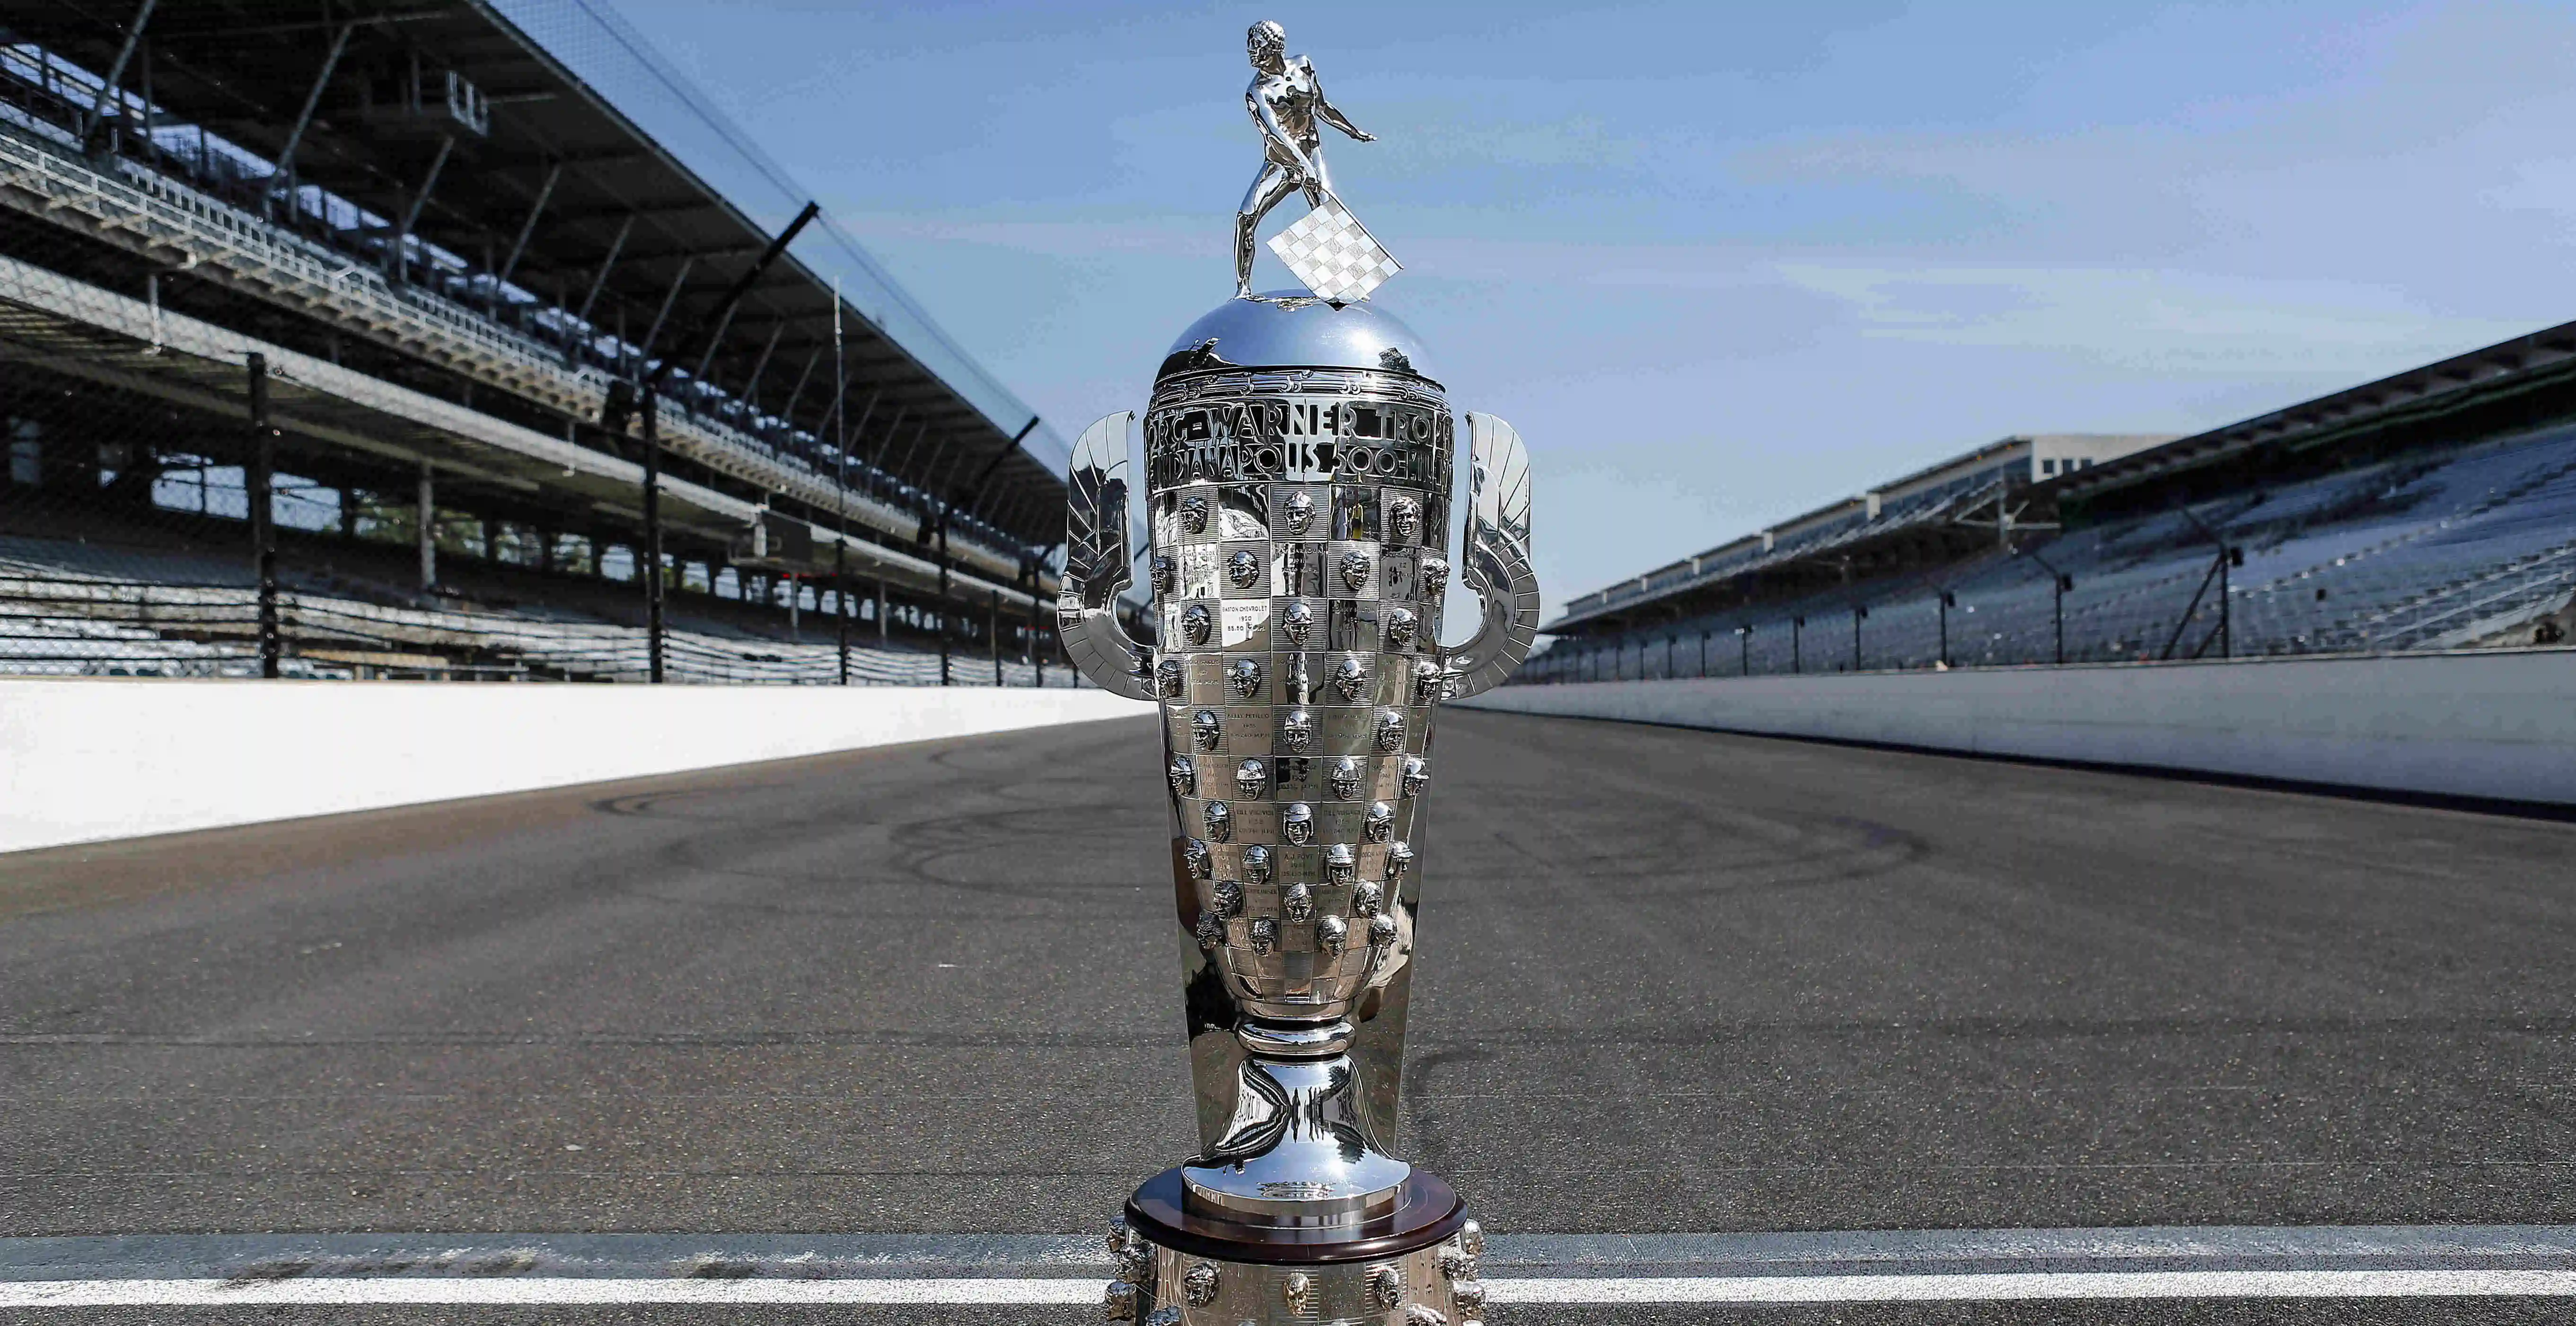 Indy 500: the oldest and fastest race in the world - 2